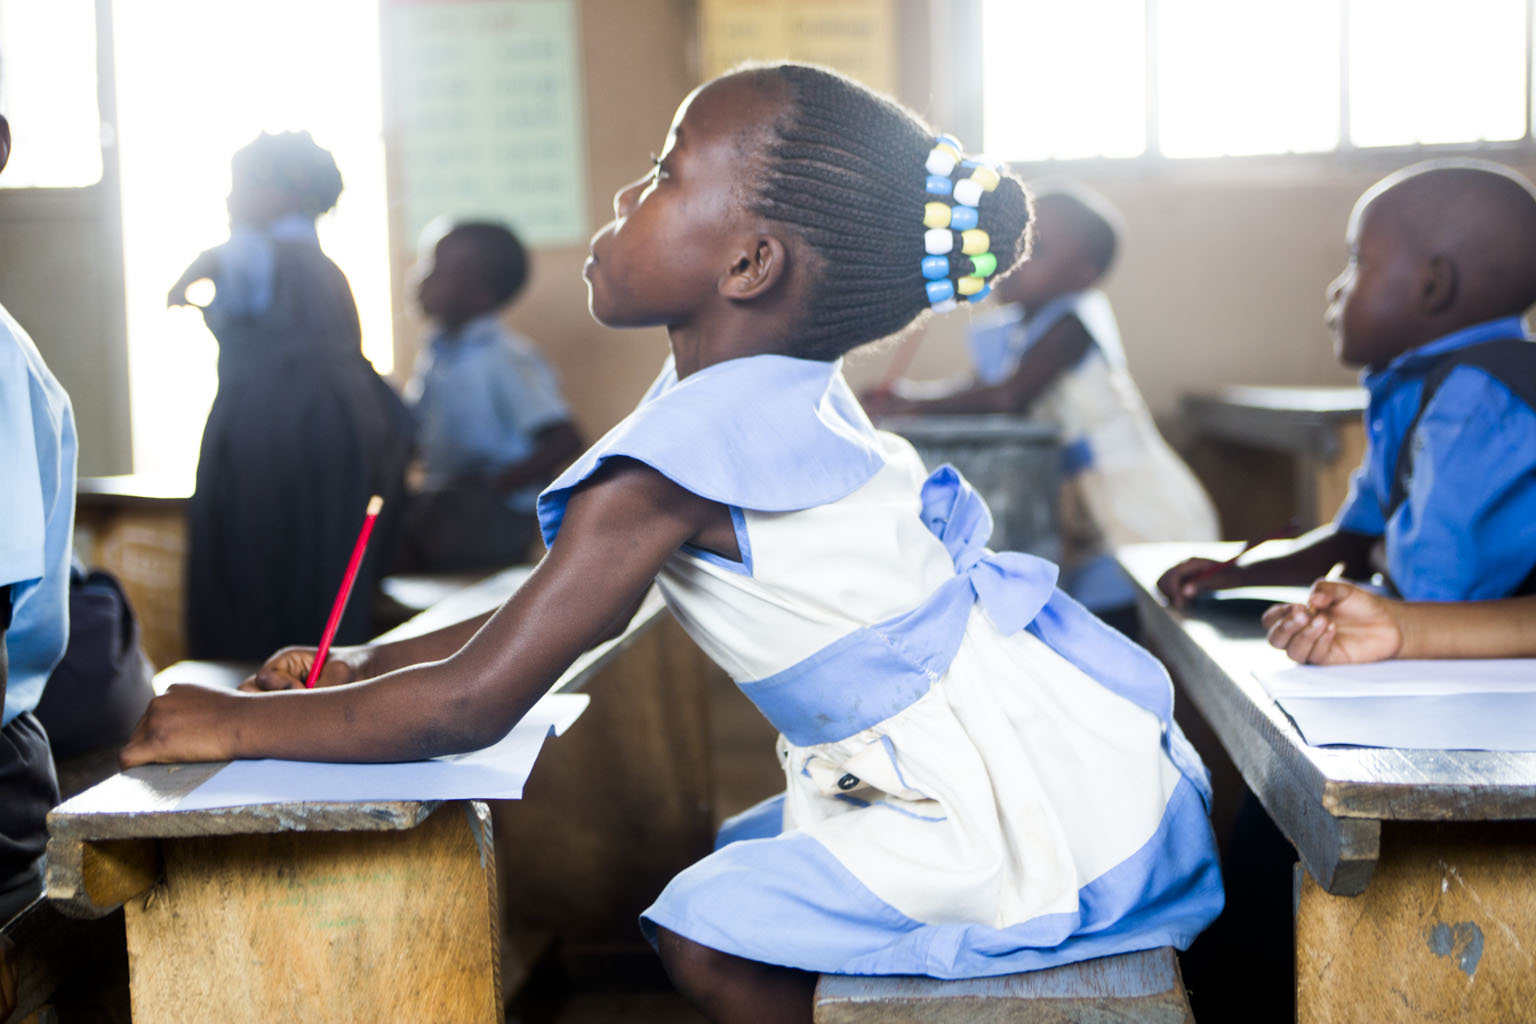 By sending a girl to school, we not only educate the next generation, but we change the world.